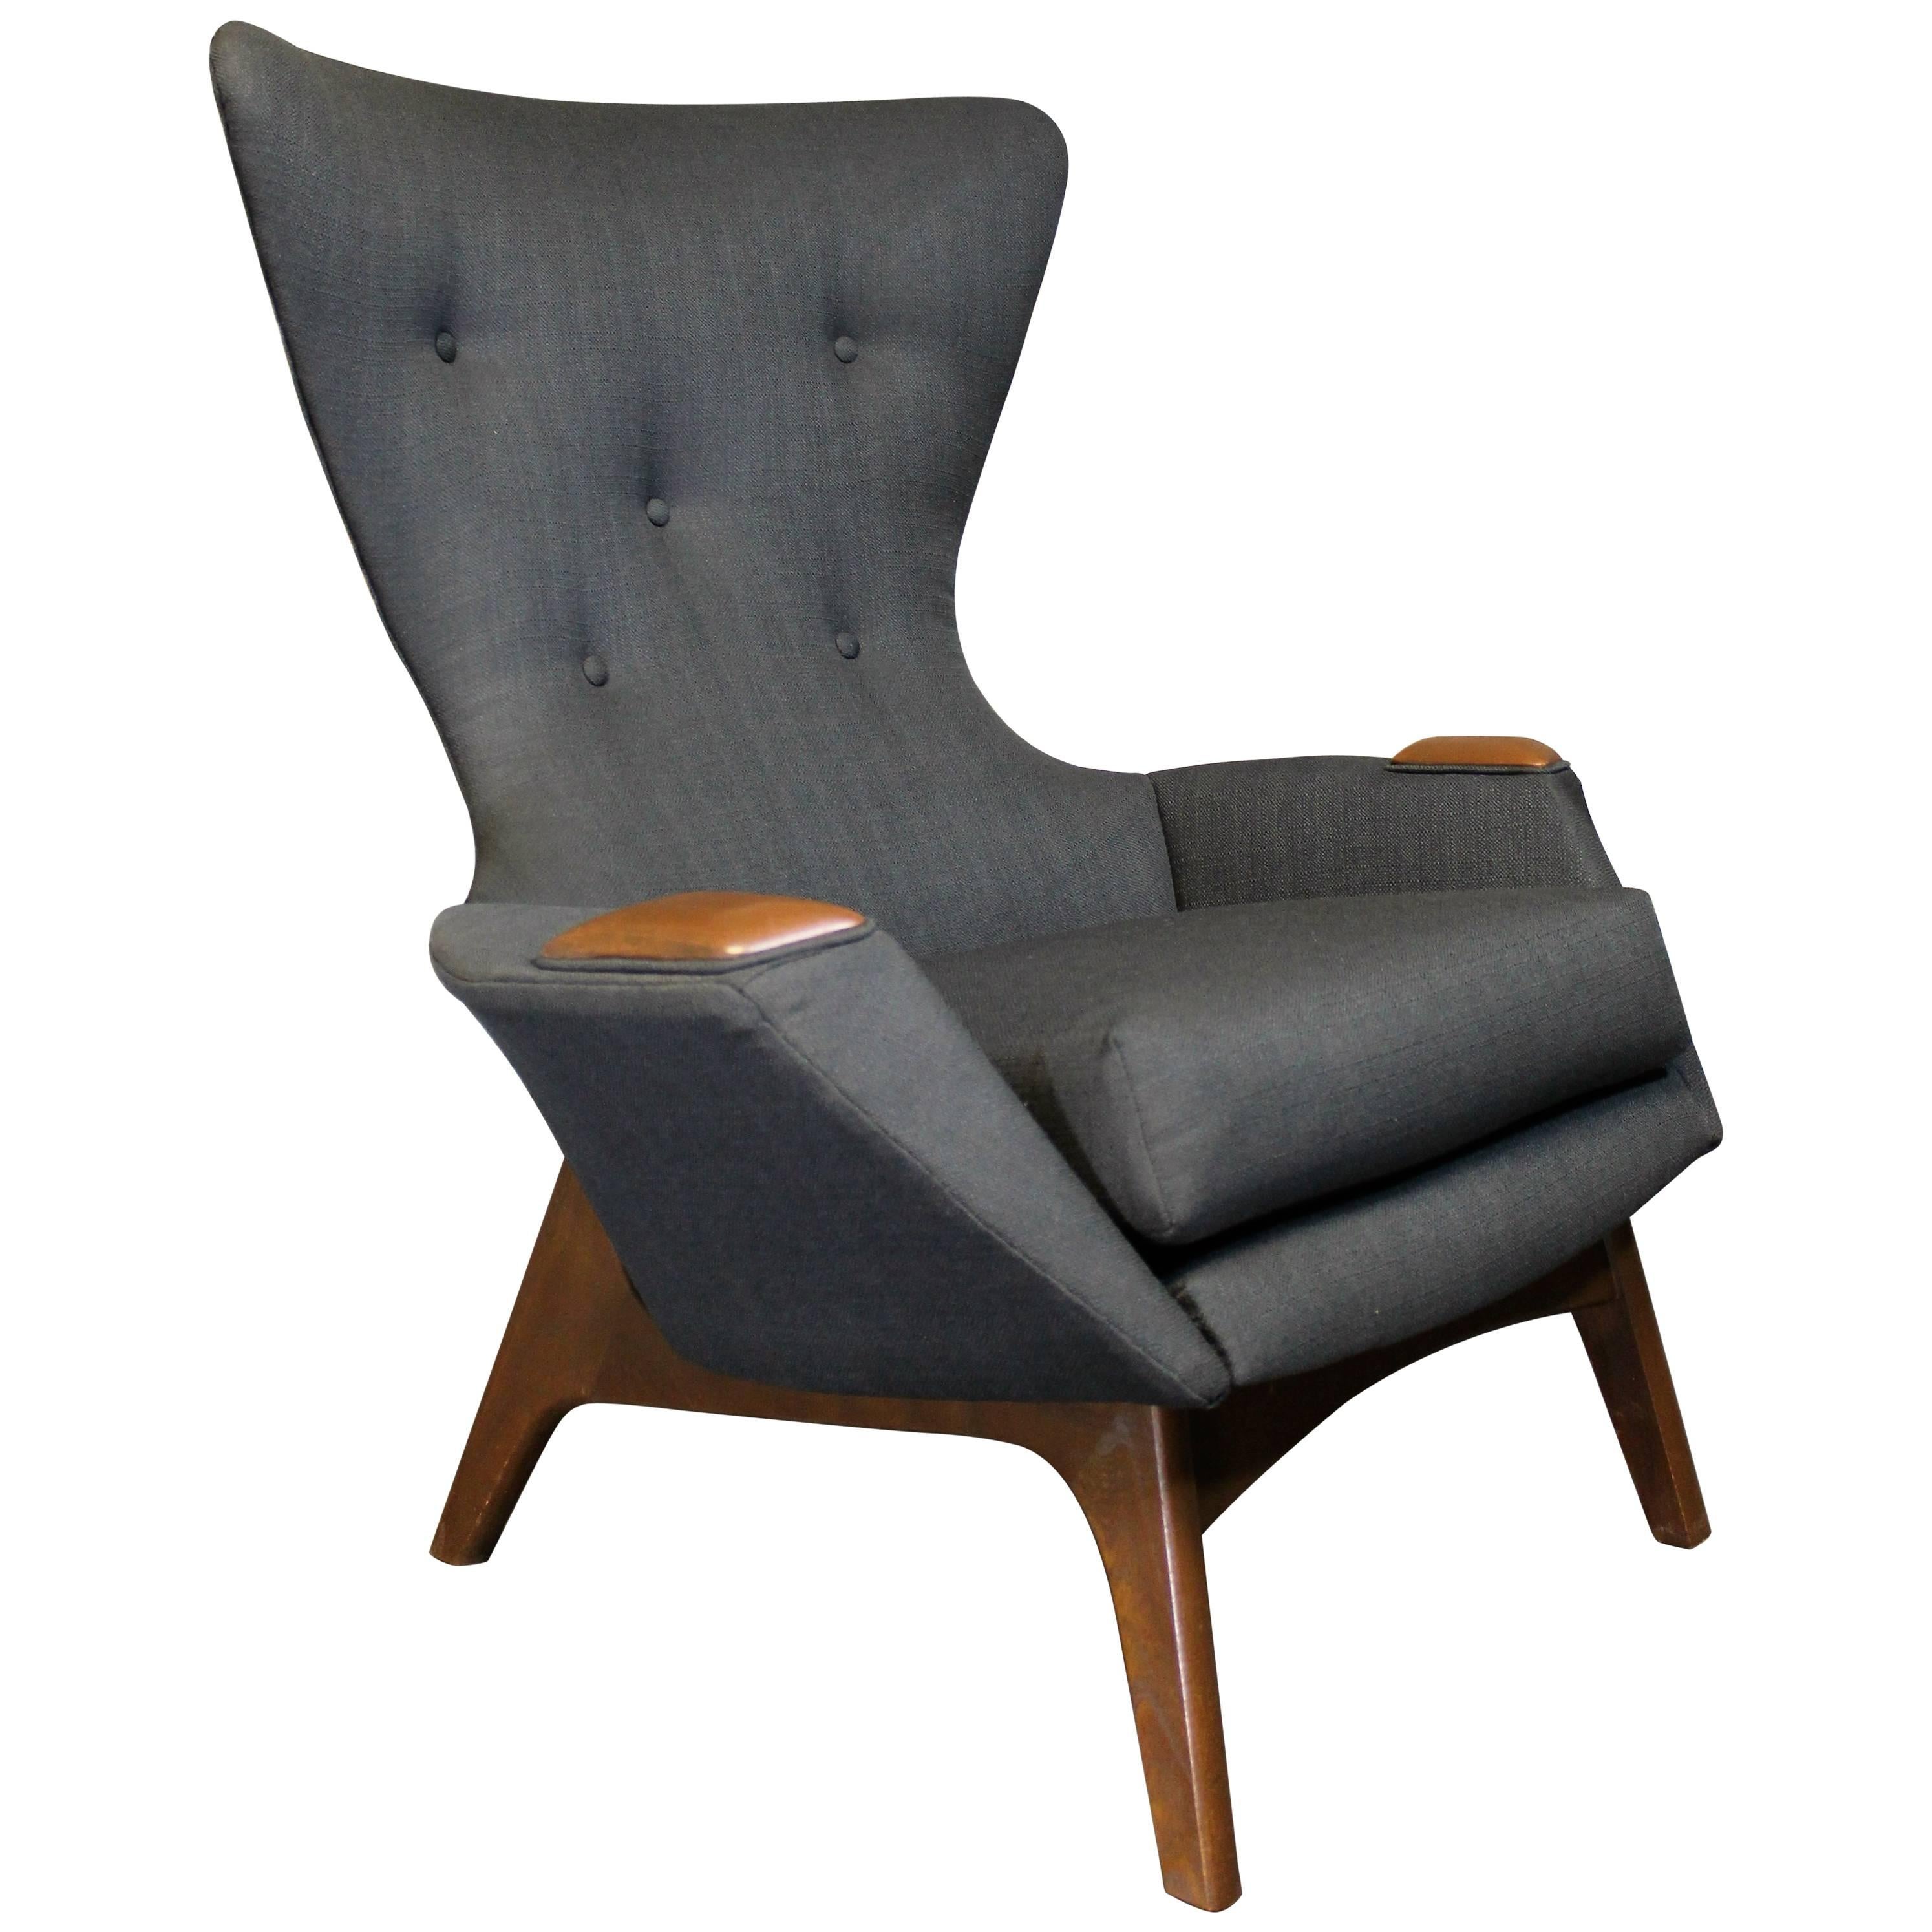 Adrian Pearsall Wingback Lounge Chair for Craft Associates